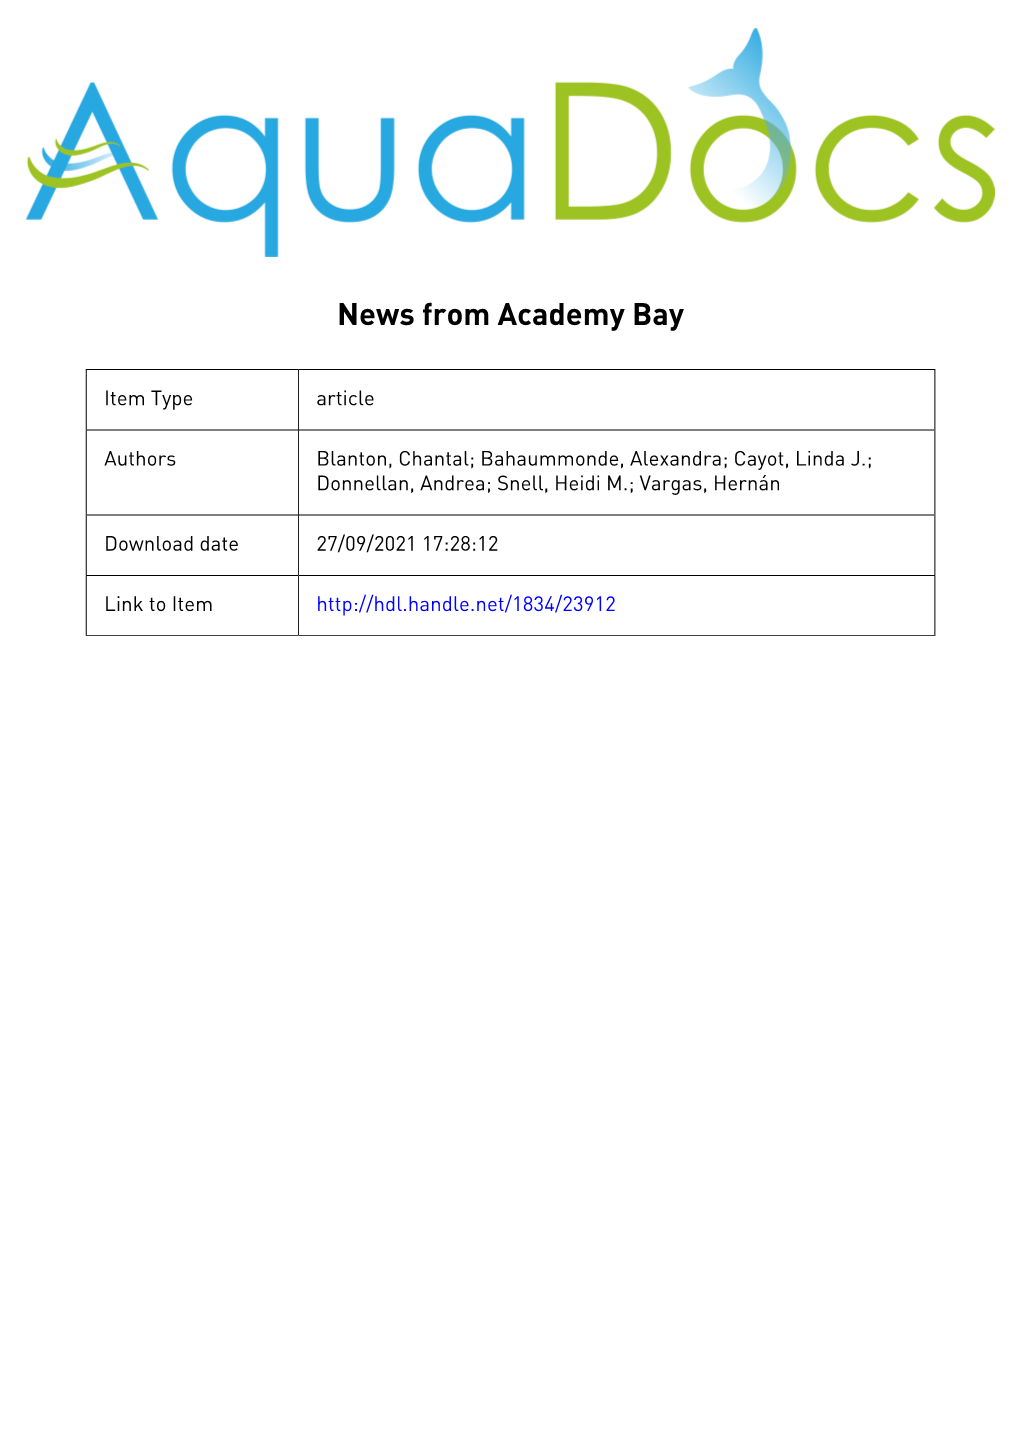 News from Academy Bay